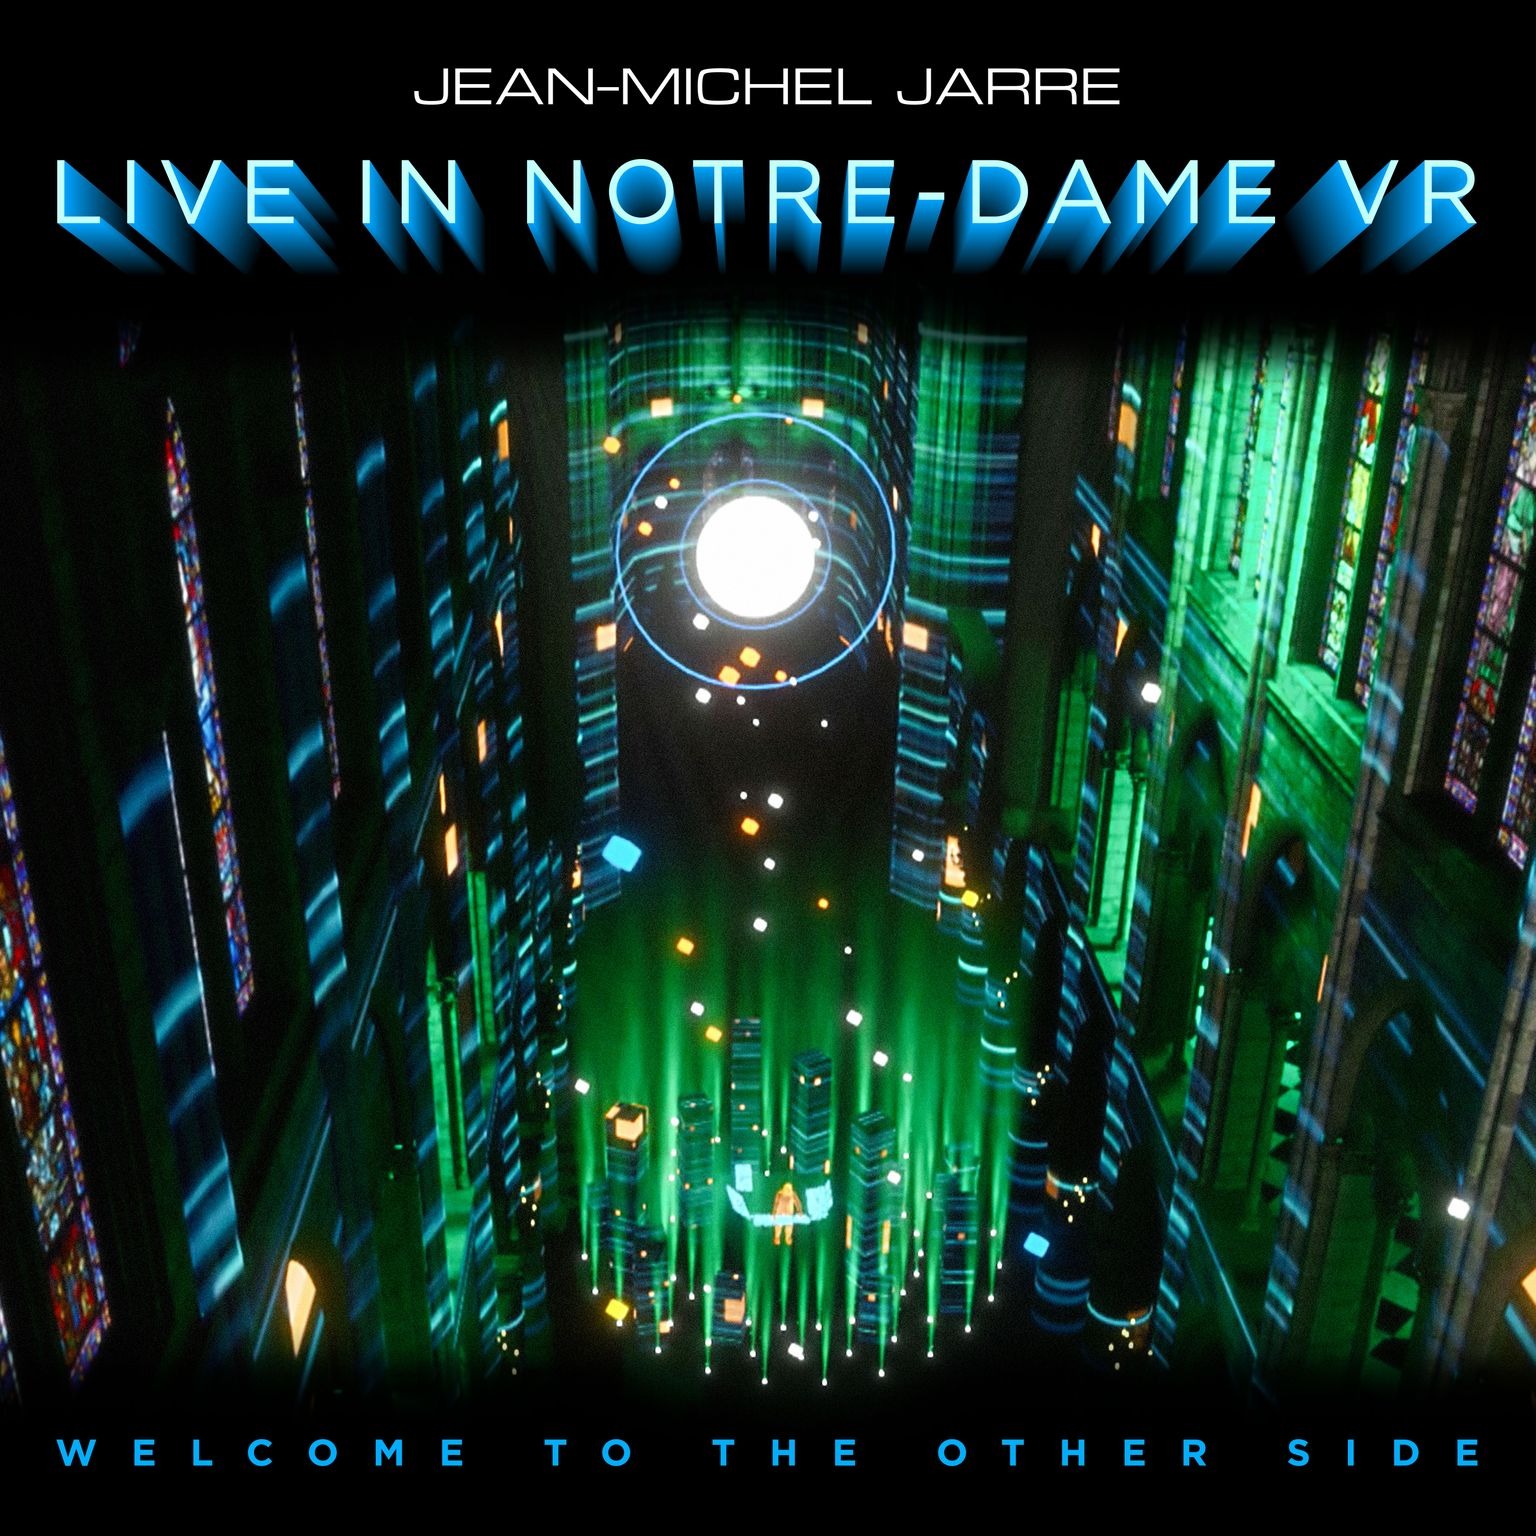 Jean-Michel Jarre – Welcome To The Other Side Live In Notre-Dame VR (LP)